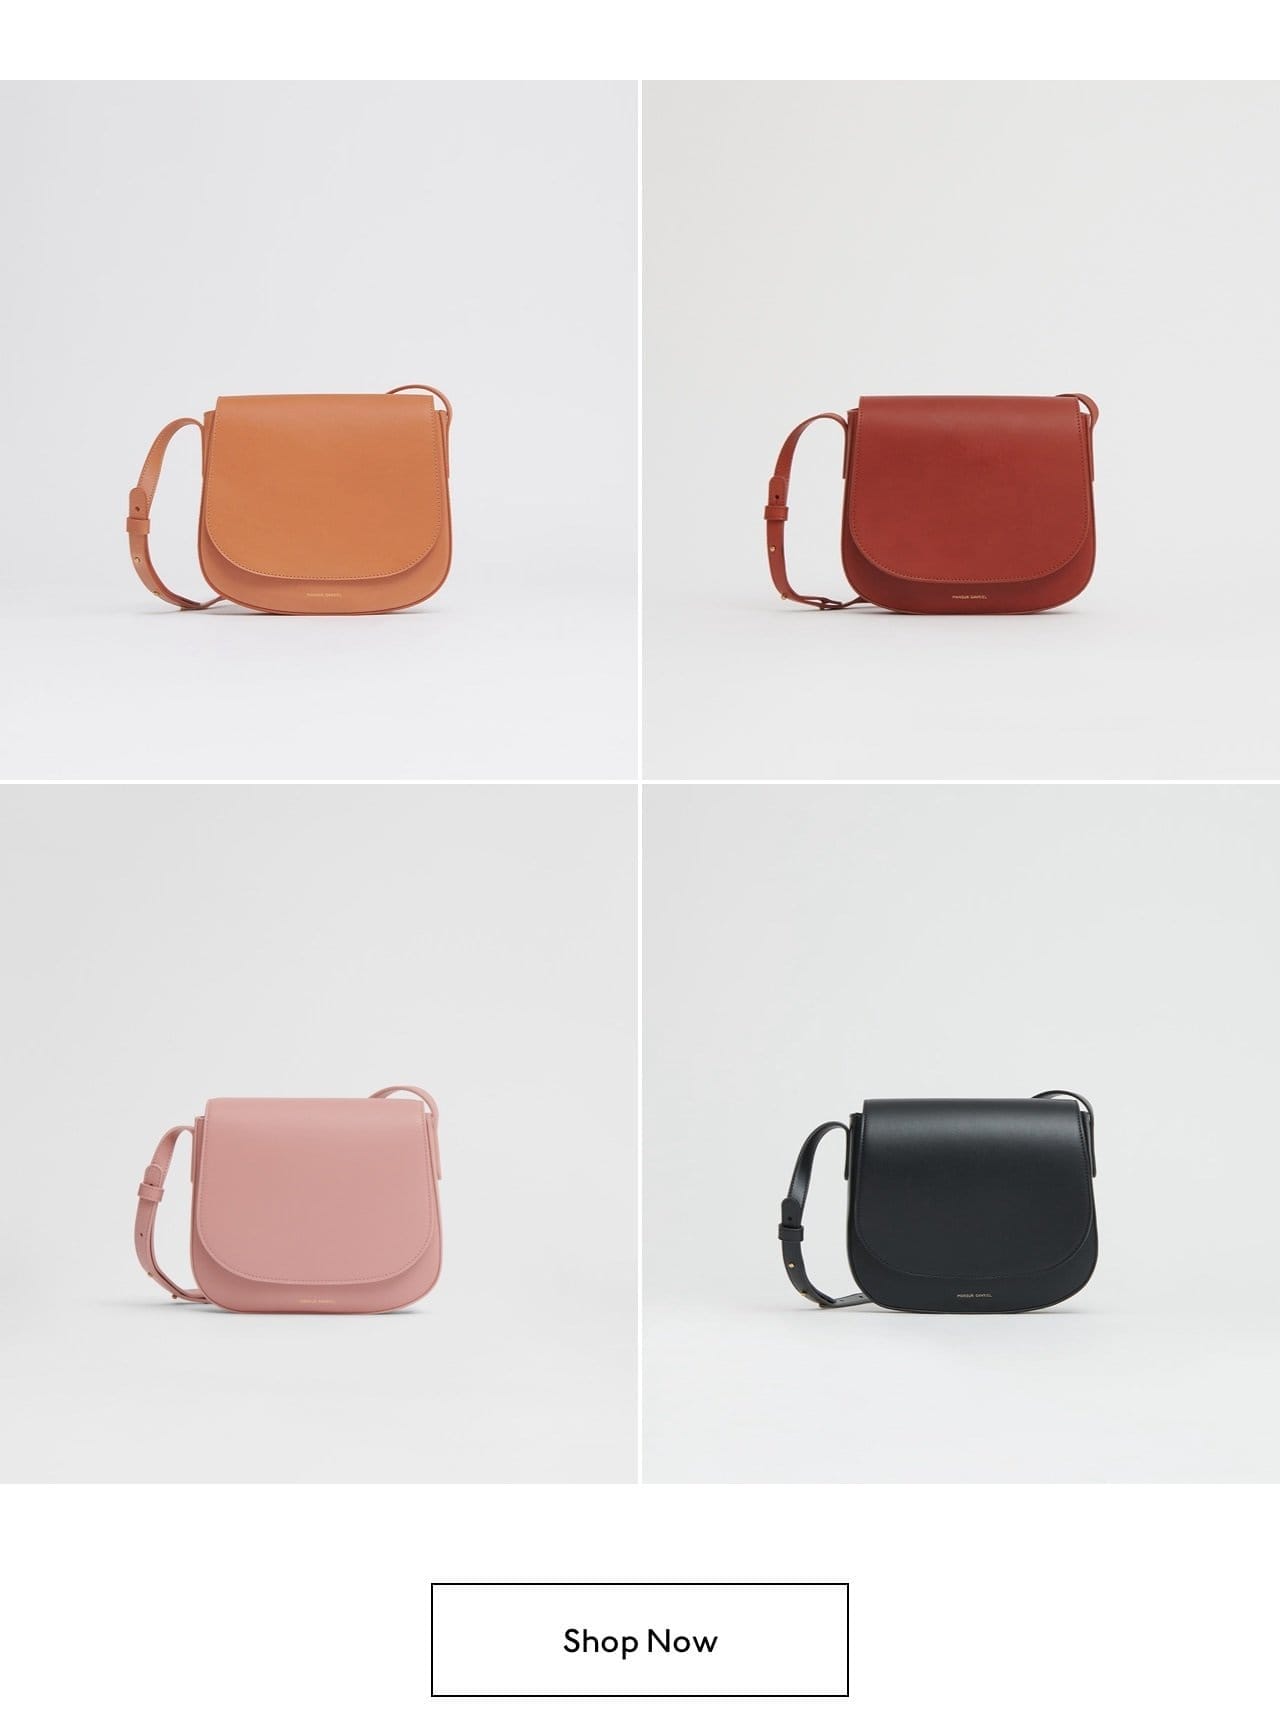 Shop all colors of the Classic Crossbody: Cammello, Brandy, Rose, and Black.